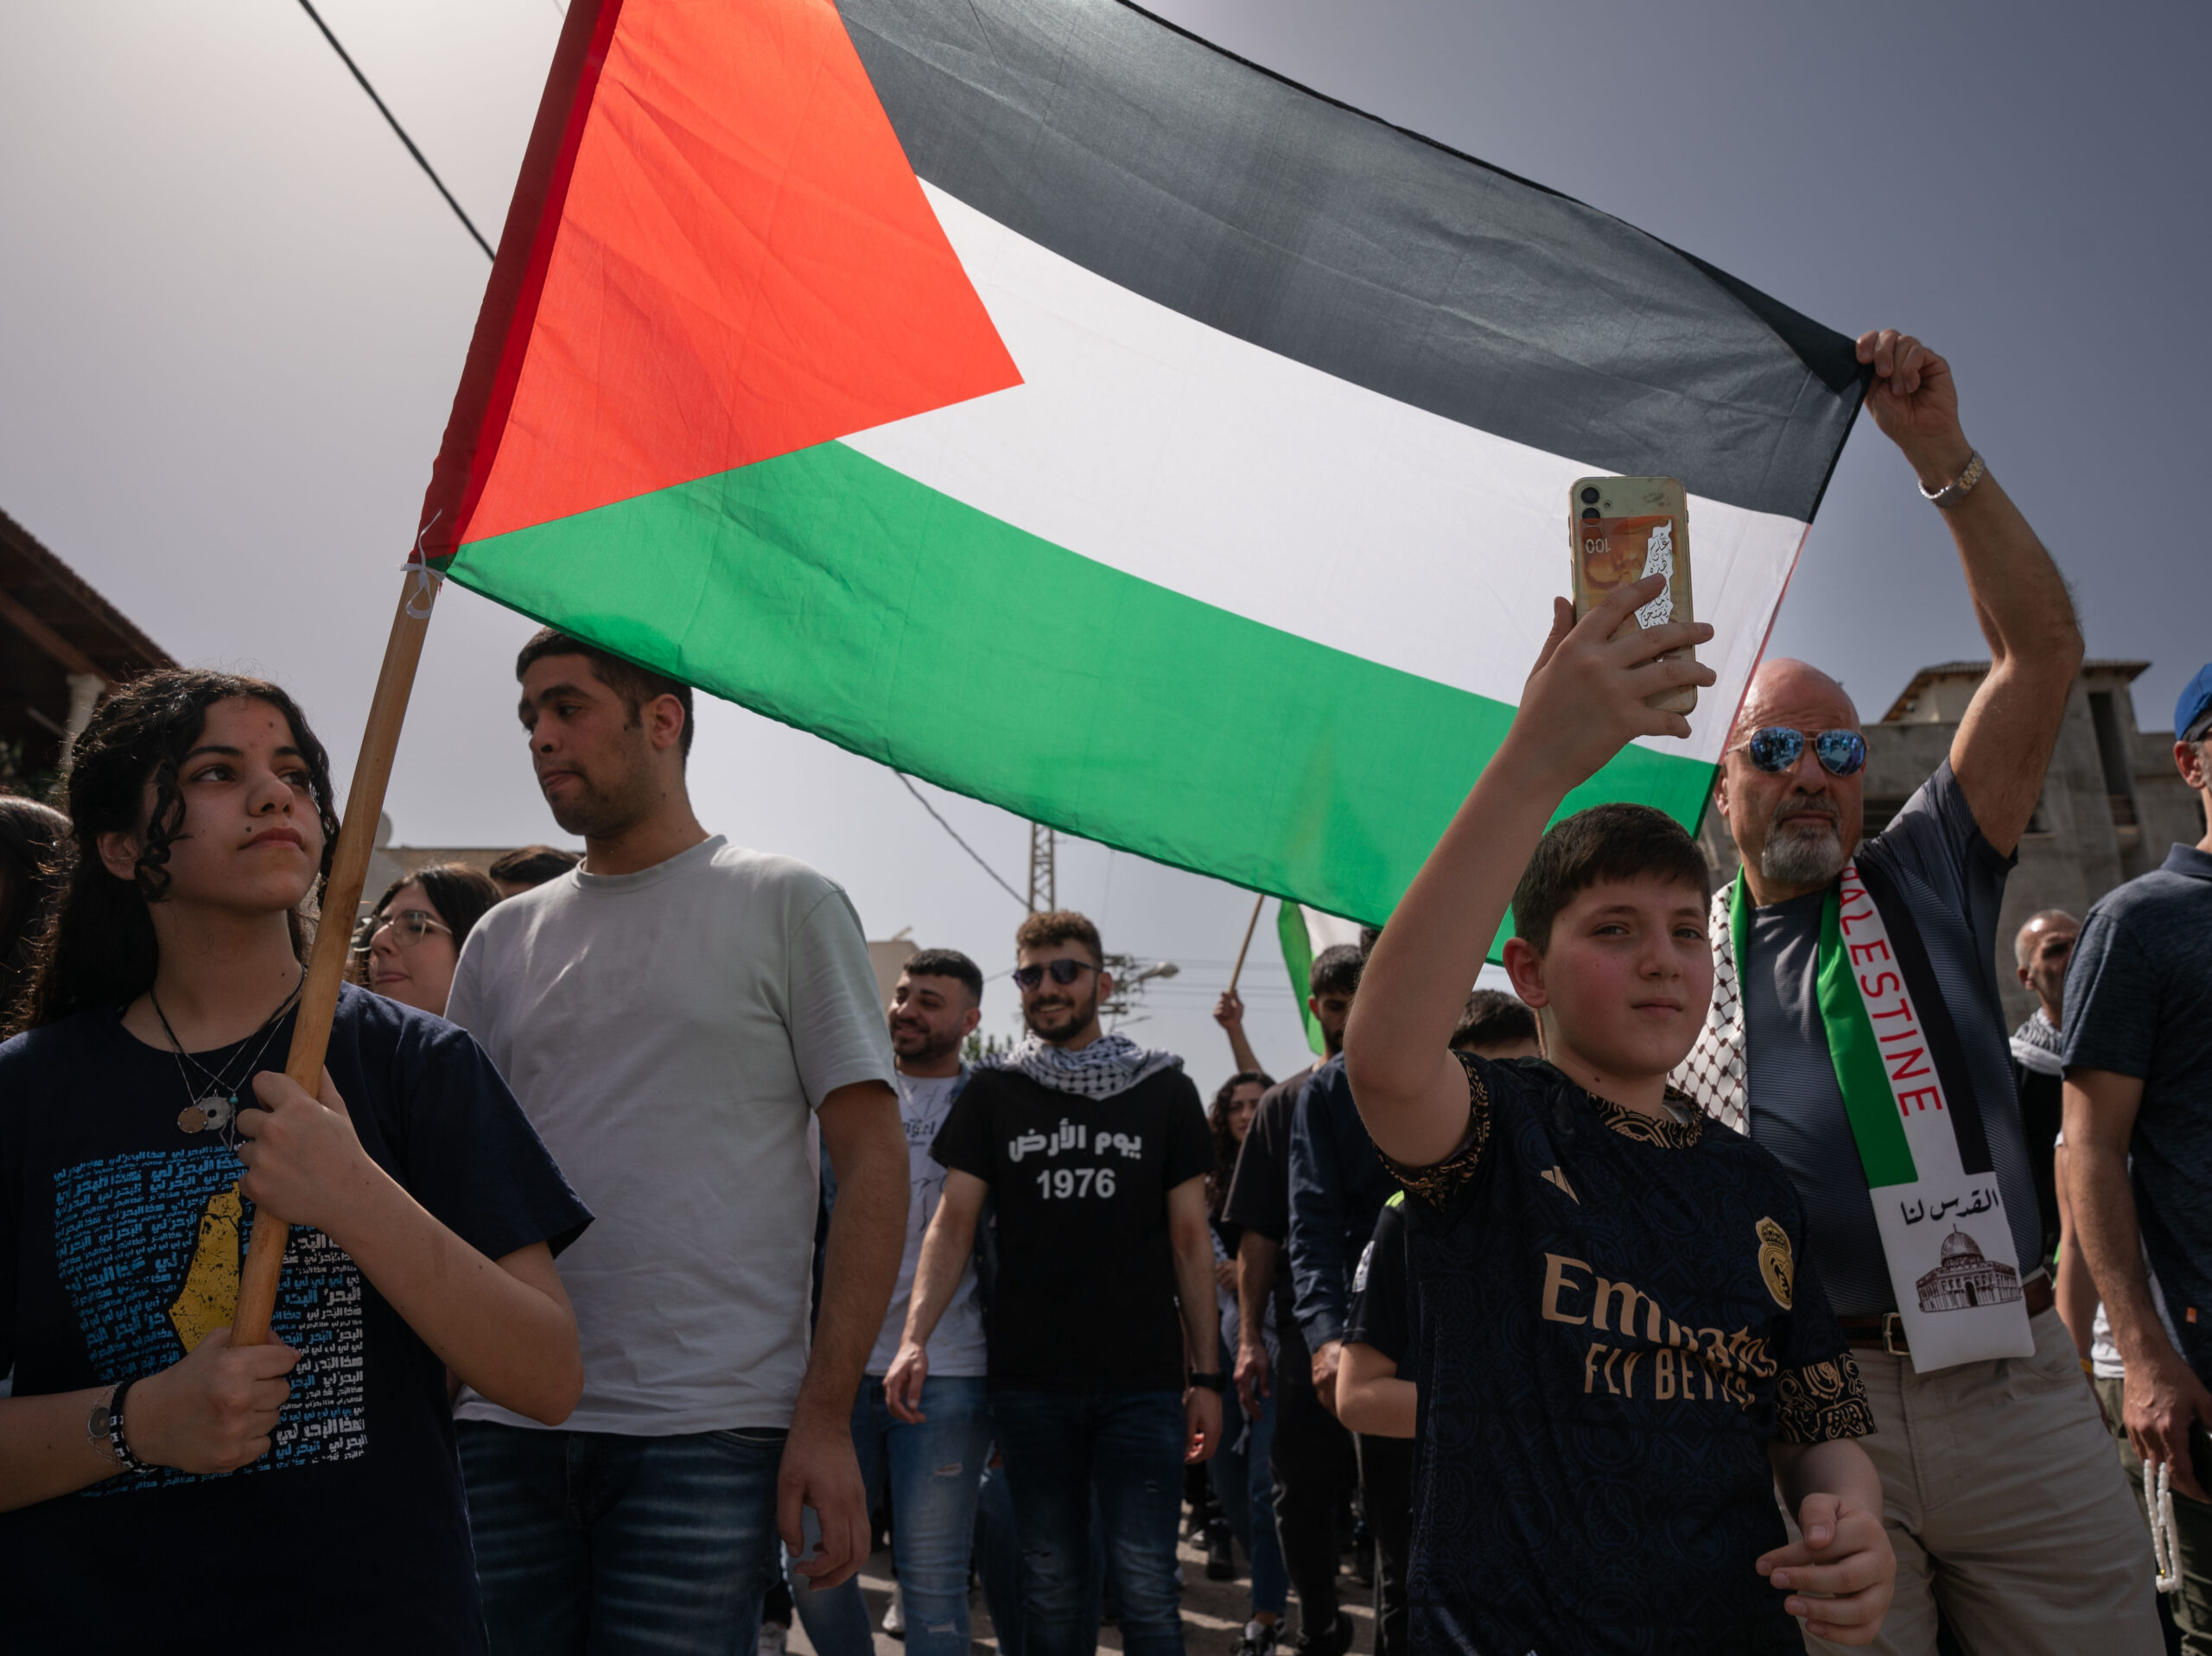 Palestinian citizens of Israel hold an anti-war protest in the town of Deir Hanna, Israel, on March 30.